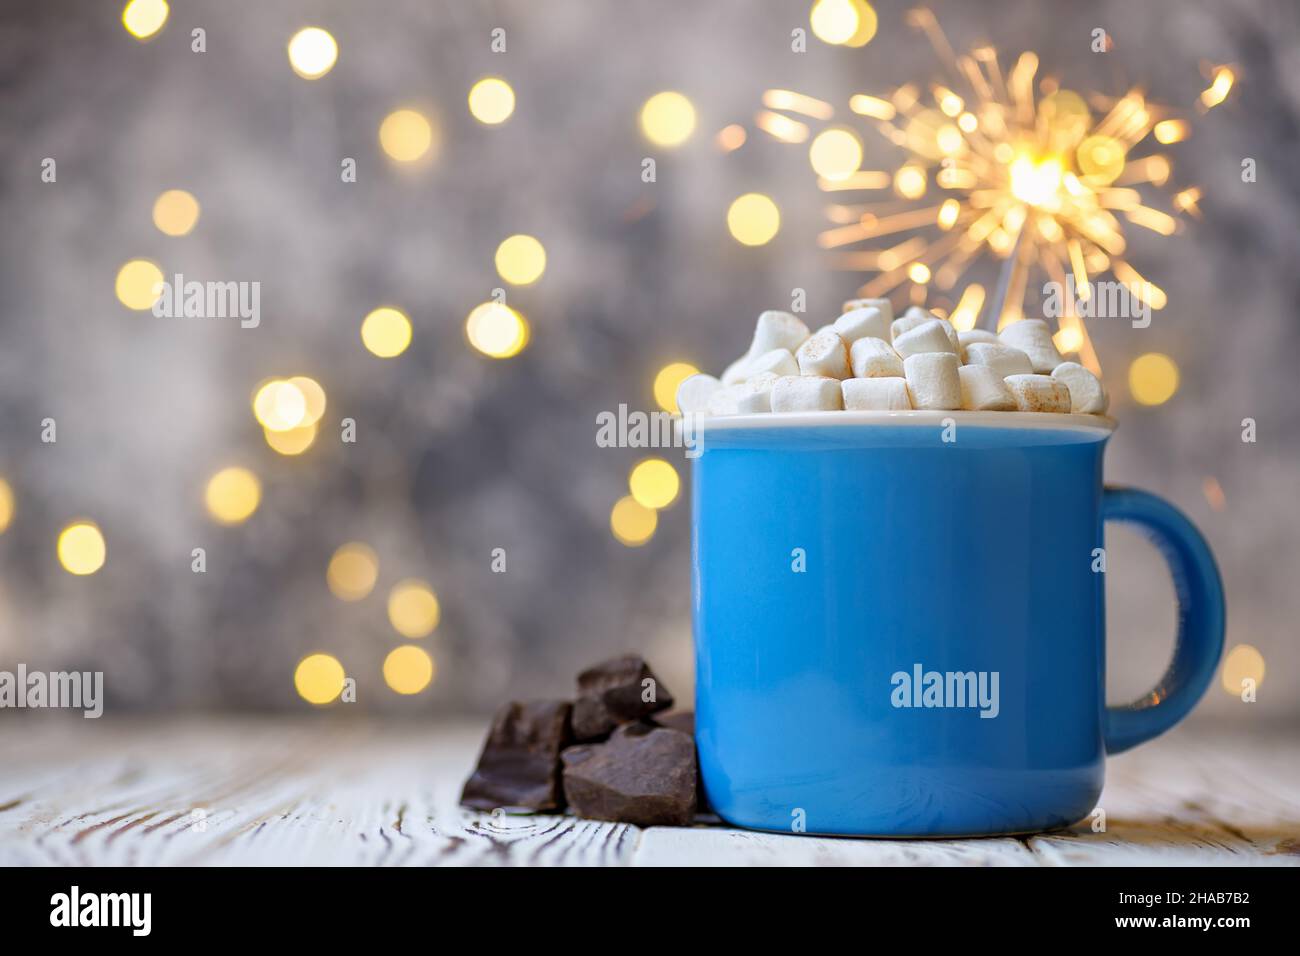 Hot chocolate with marshmallow and burning sparkler on wooden table Stock Photo